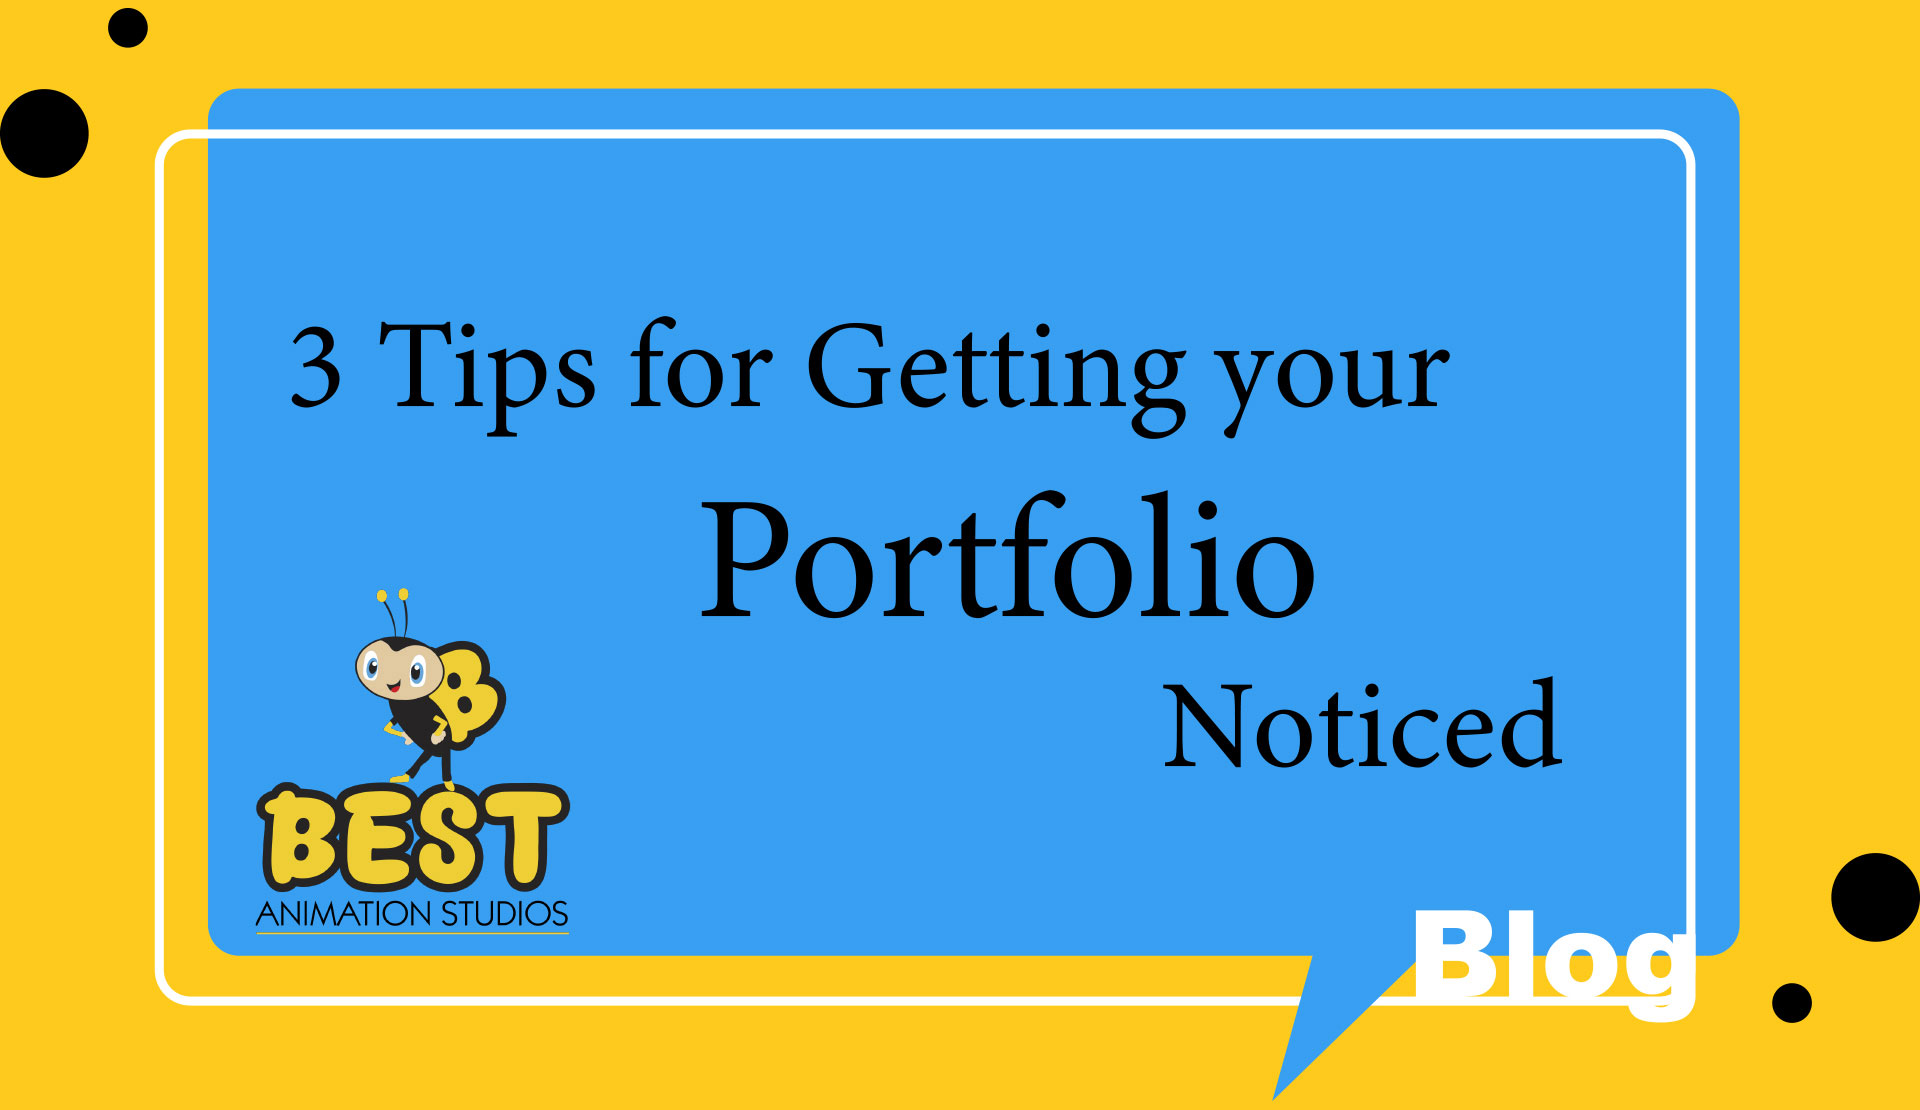 3 Tips for Getting your Portfolio Noticed